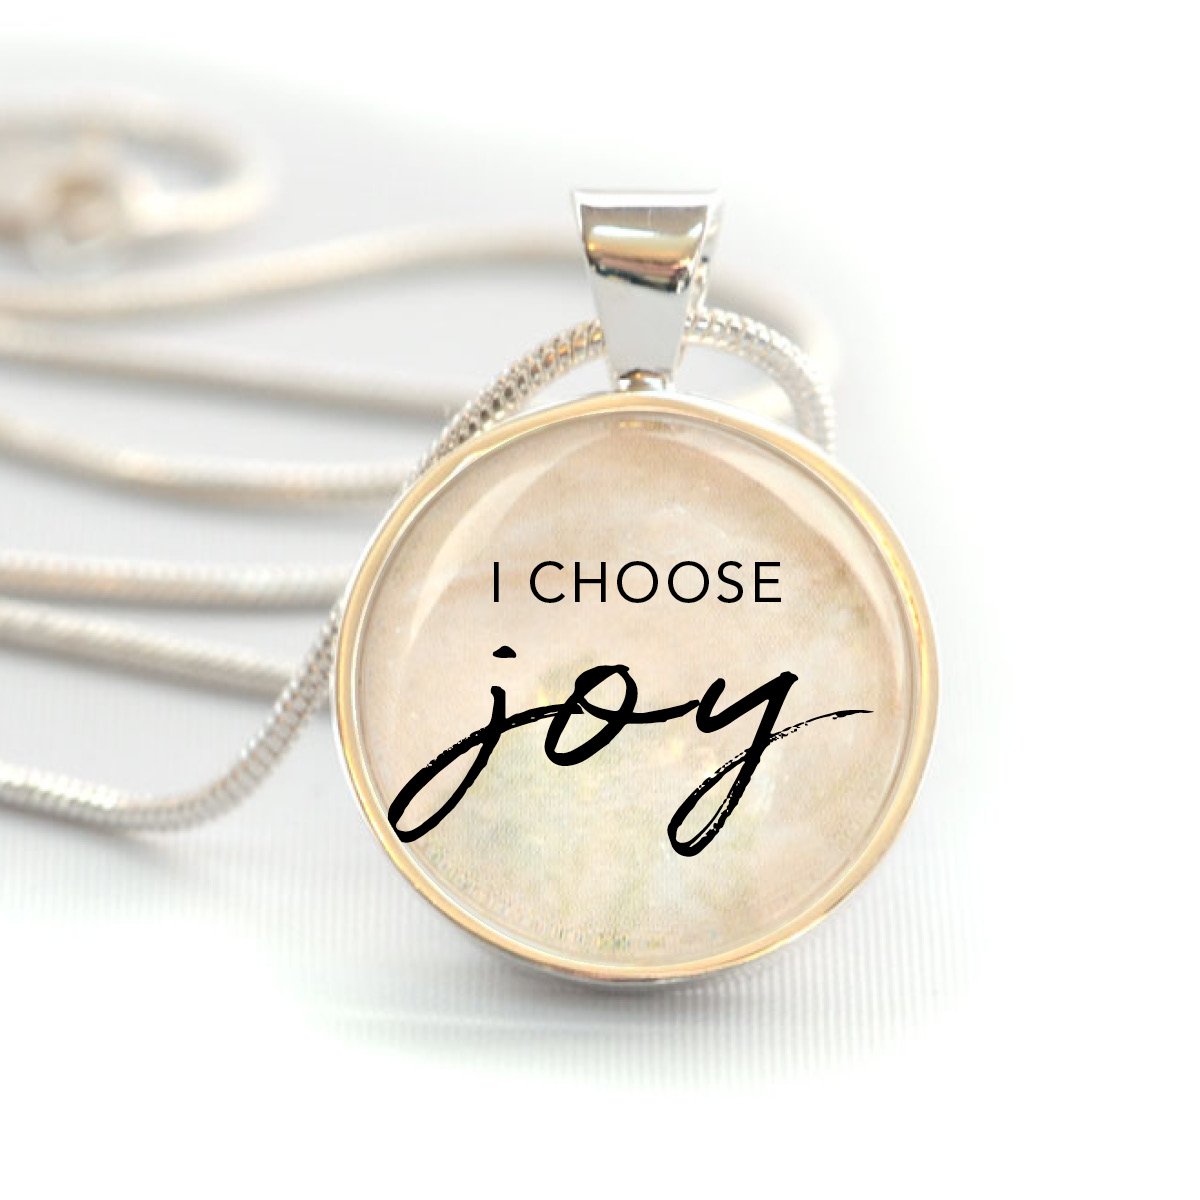 I Choose Joy Silver-Plated Christian Pendant Necklaces - Available in 16mm and 20mm Sizes with Lobster Claw Clasp and Neutral/Multicolored Background. - Necklaces - Bijou Her -  -  - 